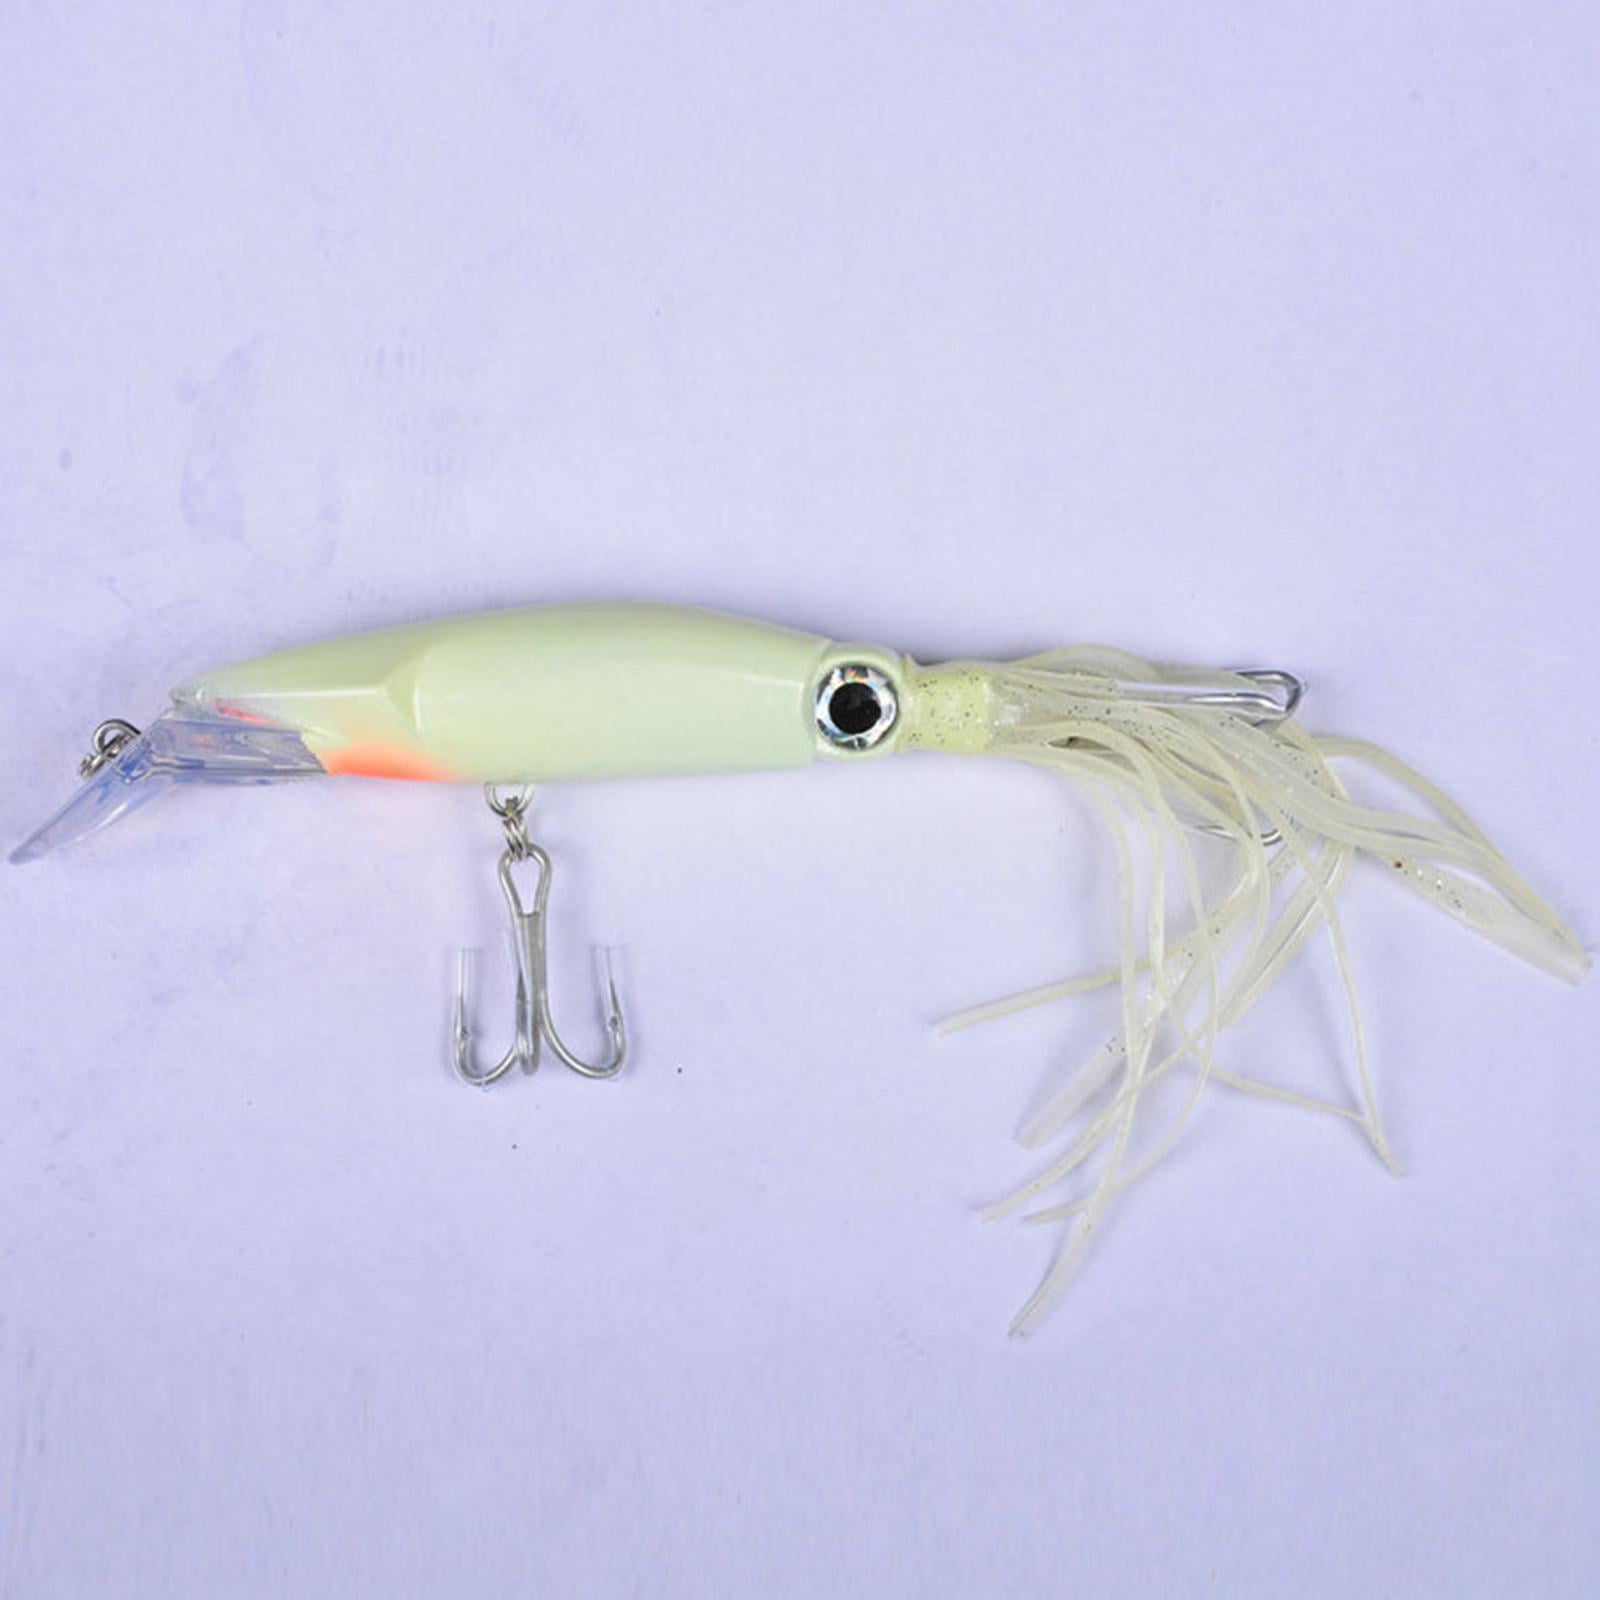 Luminous Squid Skirt Trolling 8.6in Artificial Fish, Swimming Lure Fishing  Glow for Marlin, Dolphin, Tuna, Salmon, Offshore 